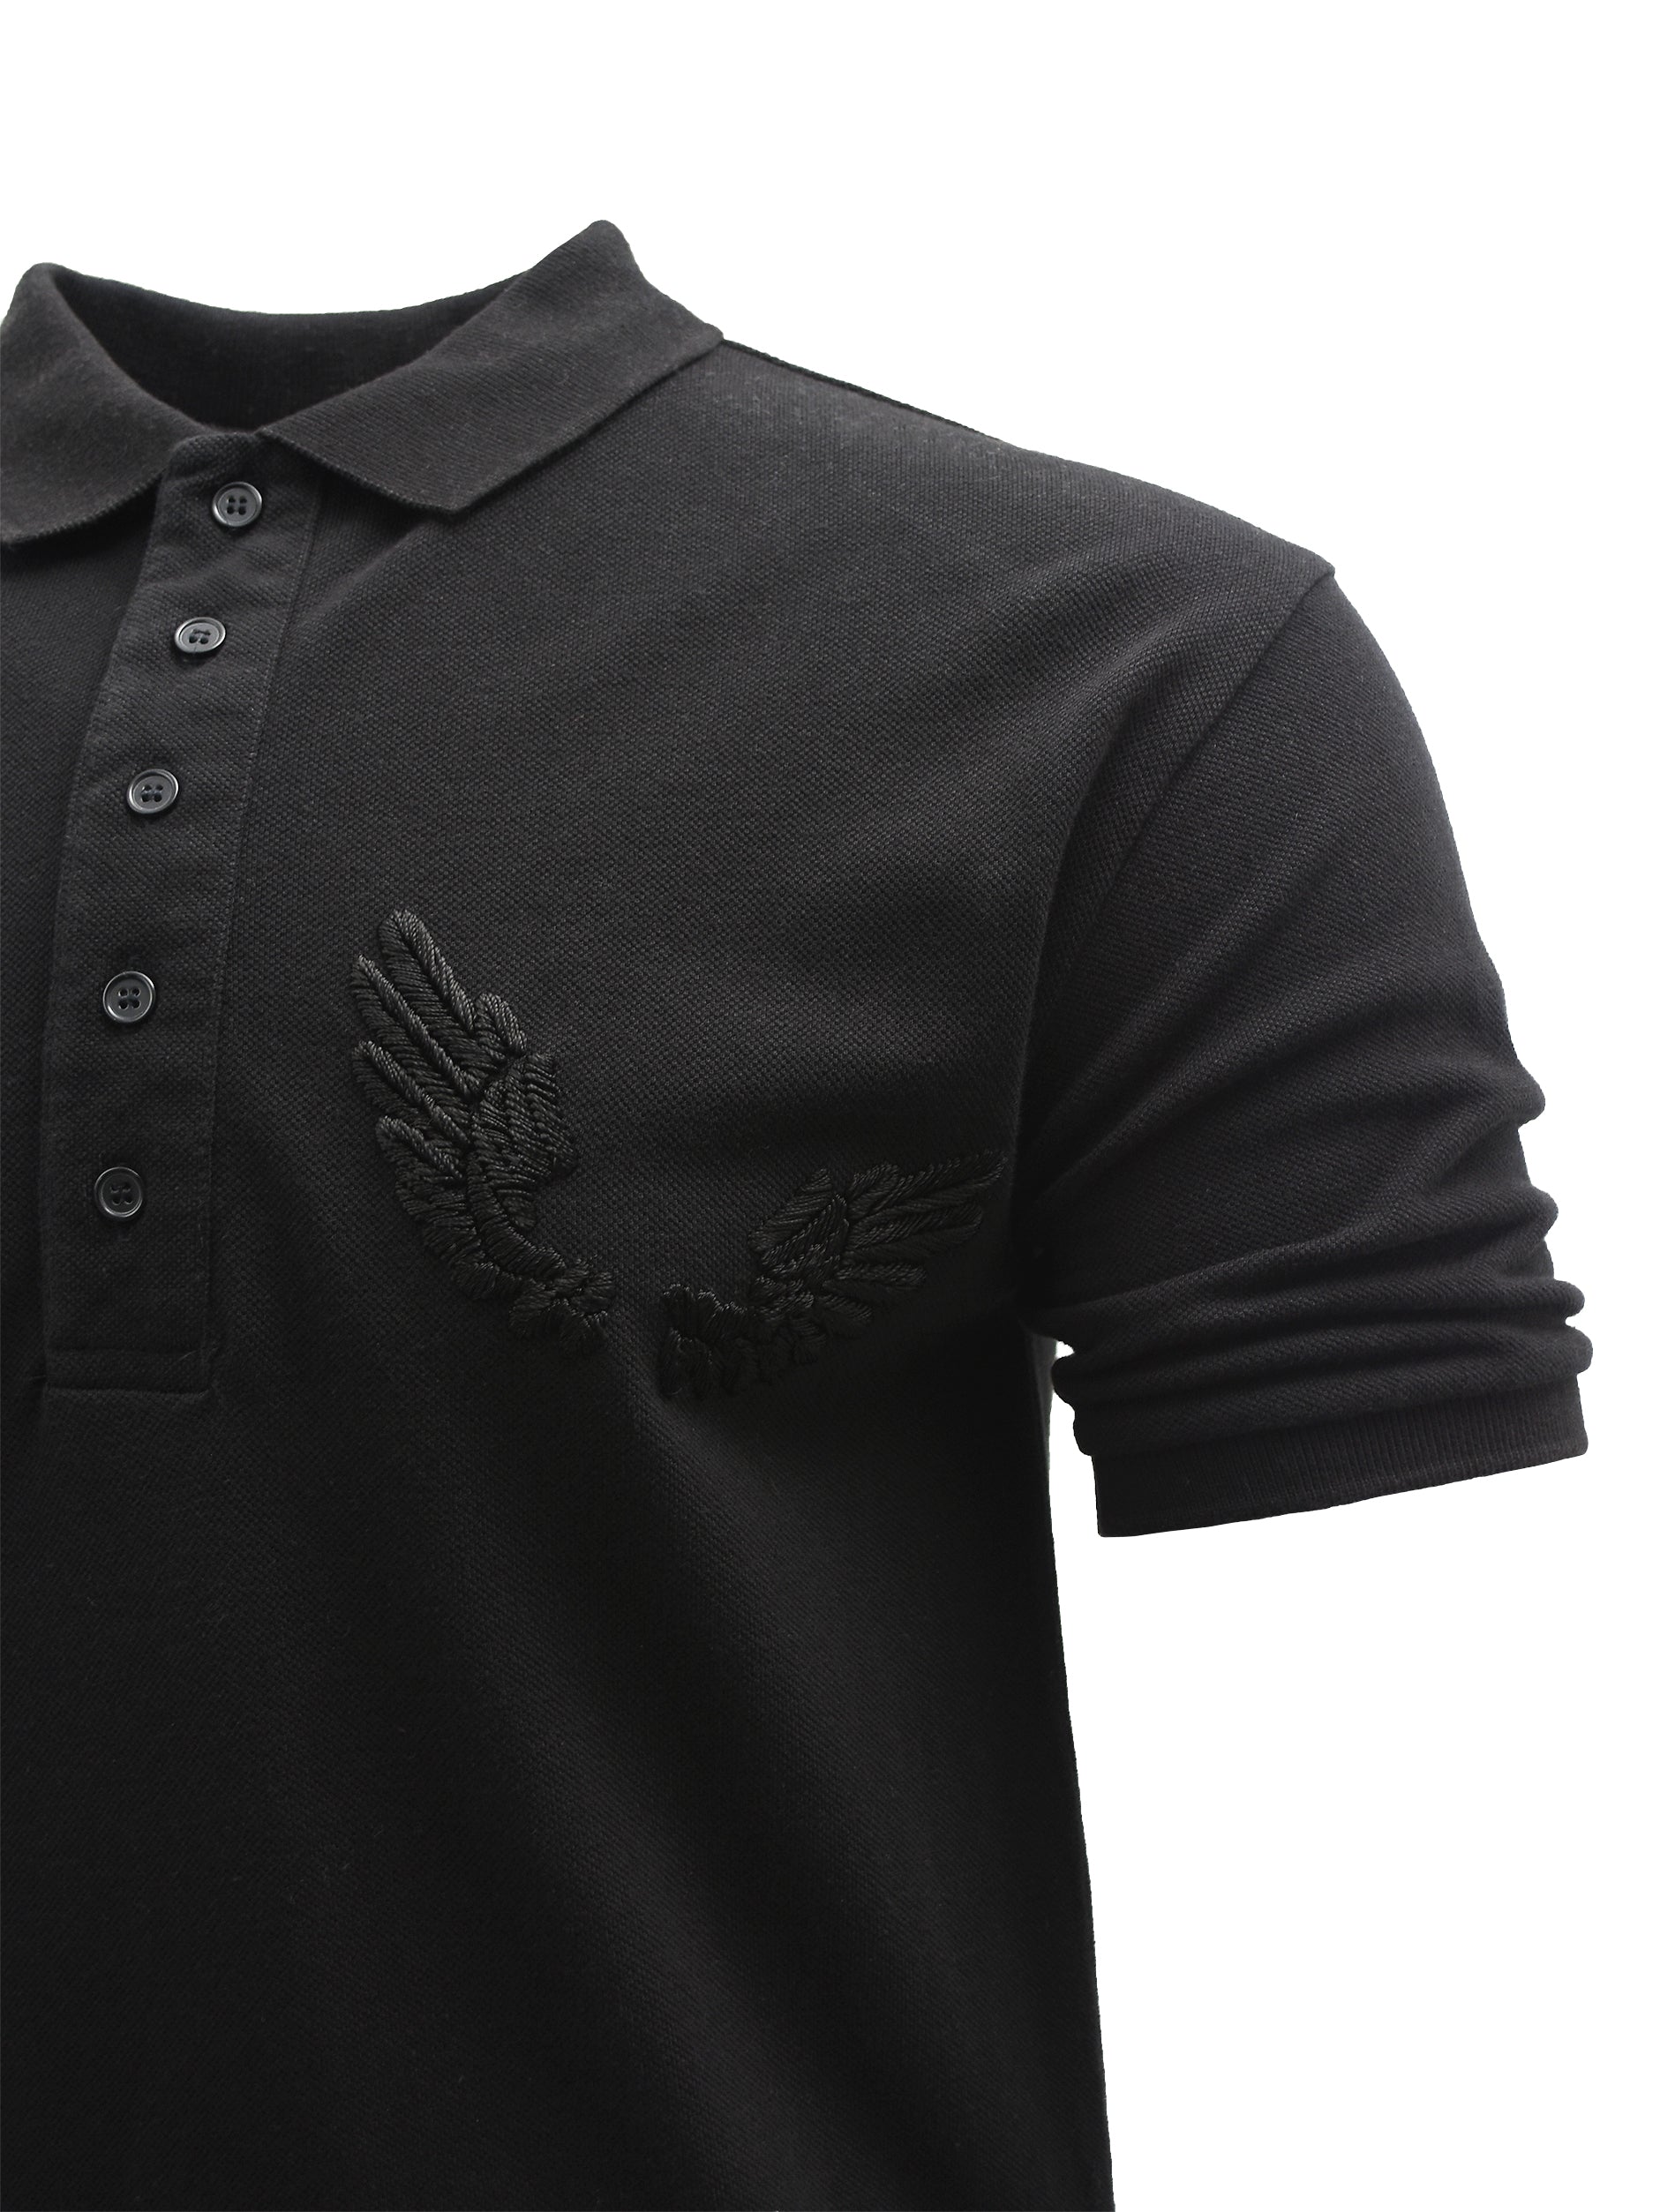 BLACK EMBROIDERED WINGS POLO TOP